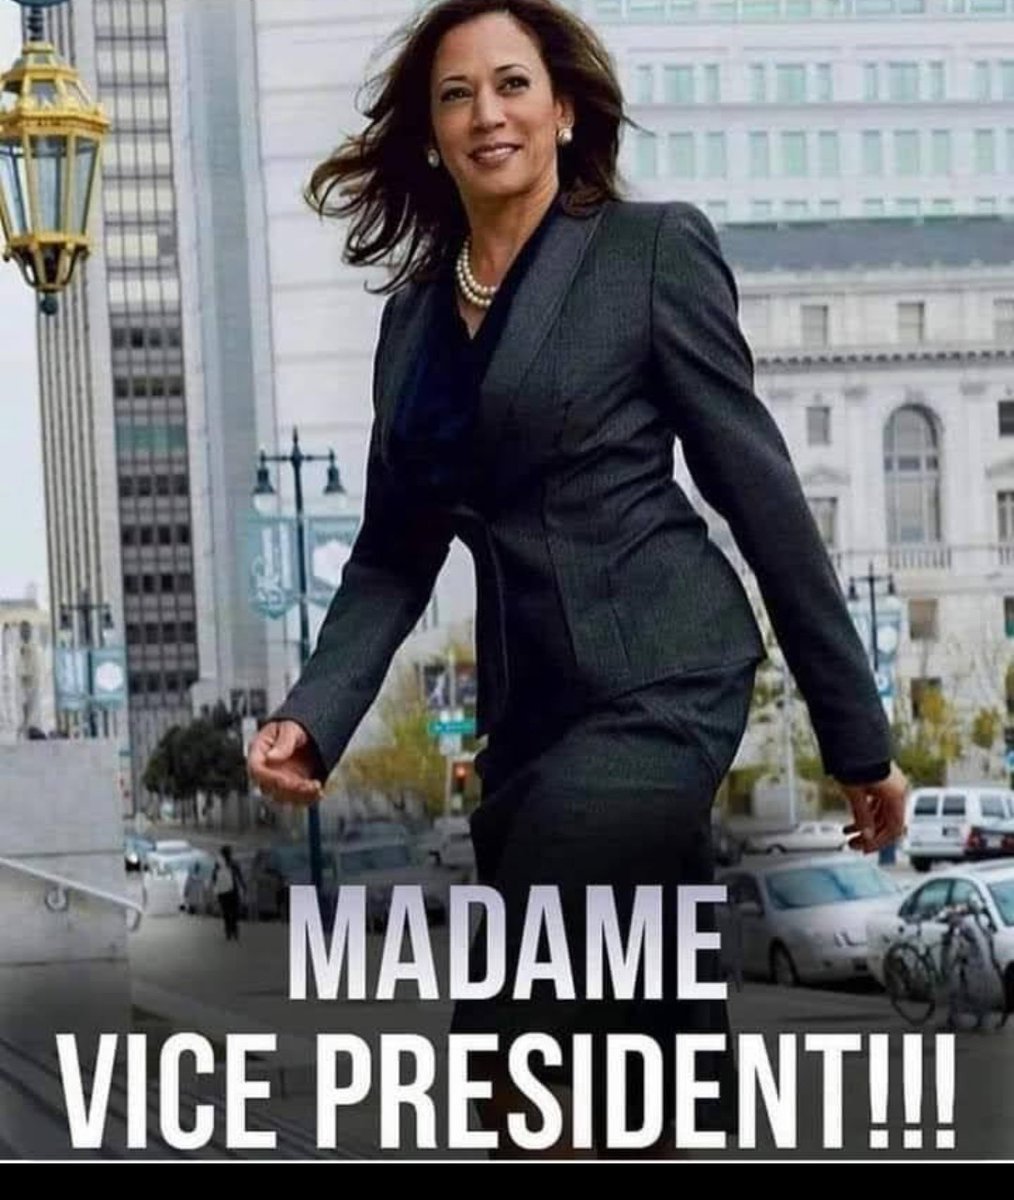 @DrDinD @Perri4health @VP #KamalaHarris Speaks for ME She speaks for all WOMEN She speaks for all my #LGBTQ brothers and sisters She speaks for the Children She speaks for YOU She cares and is fighting not for just the rich, but for all of us Support and fight for and with her #KamalaHarris